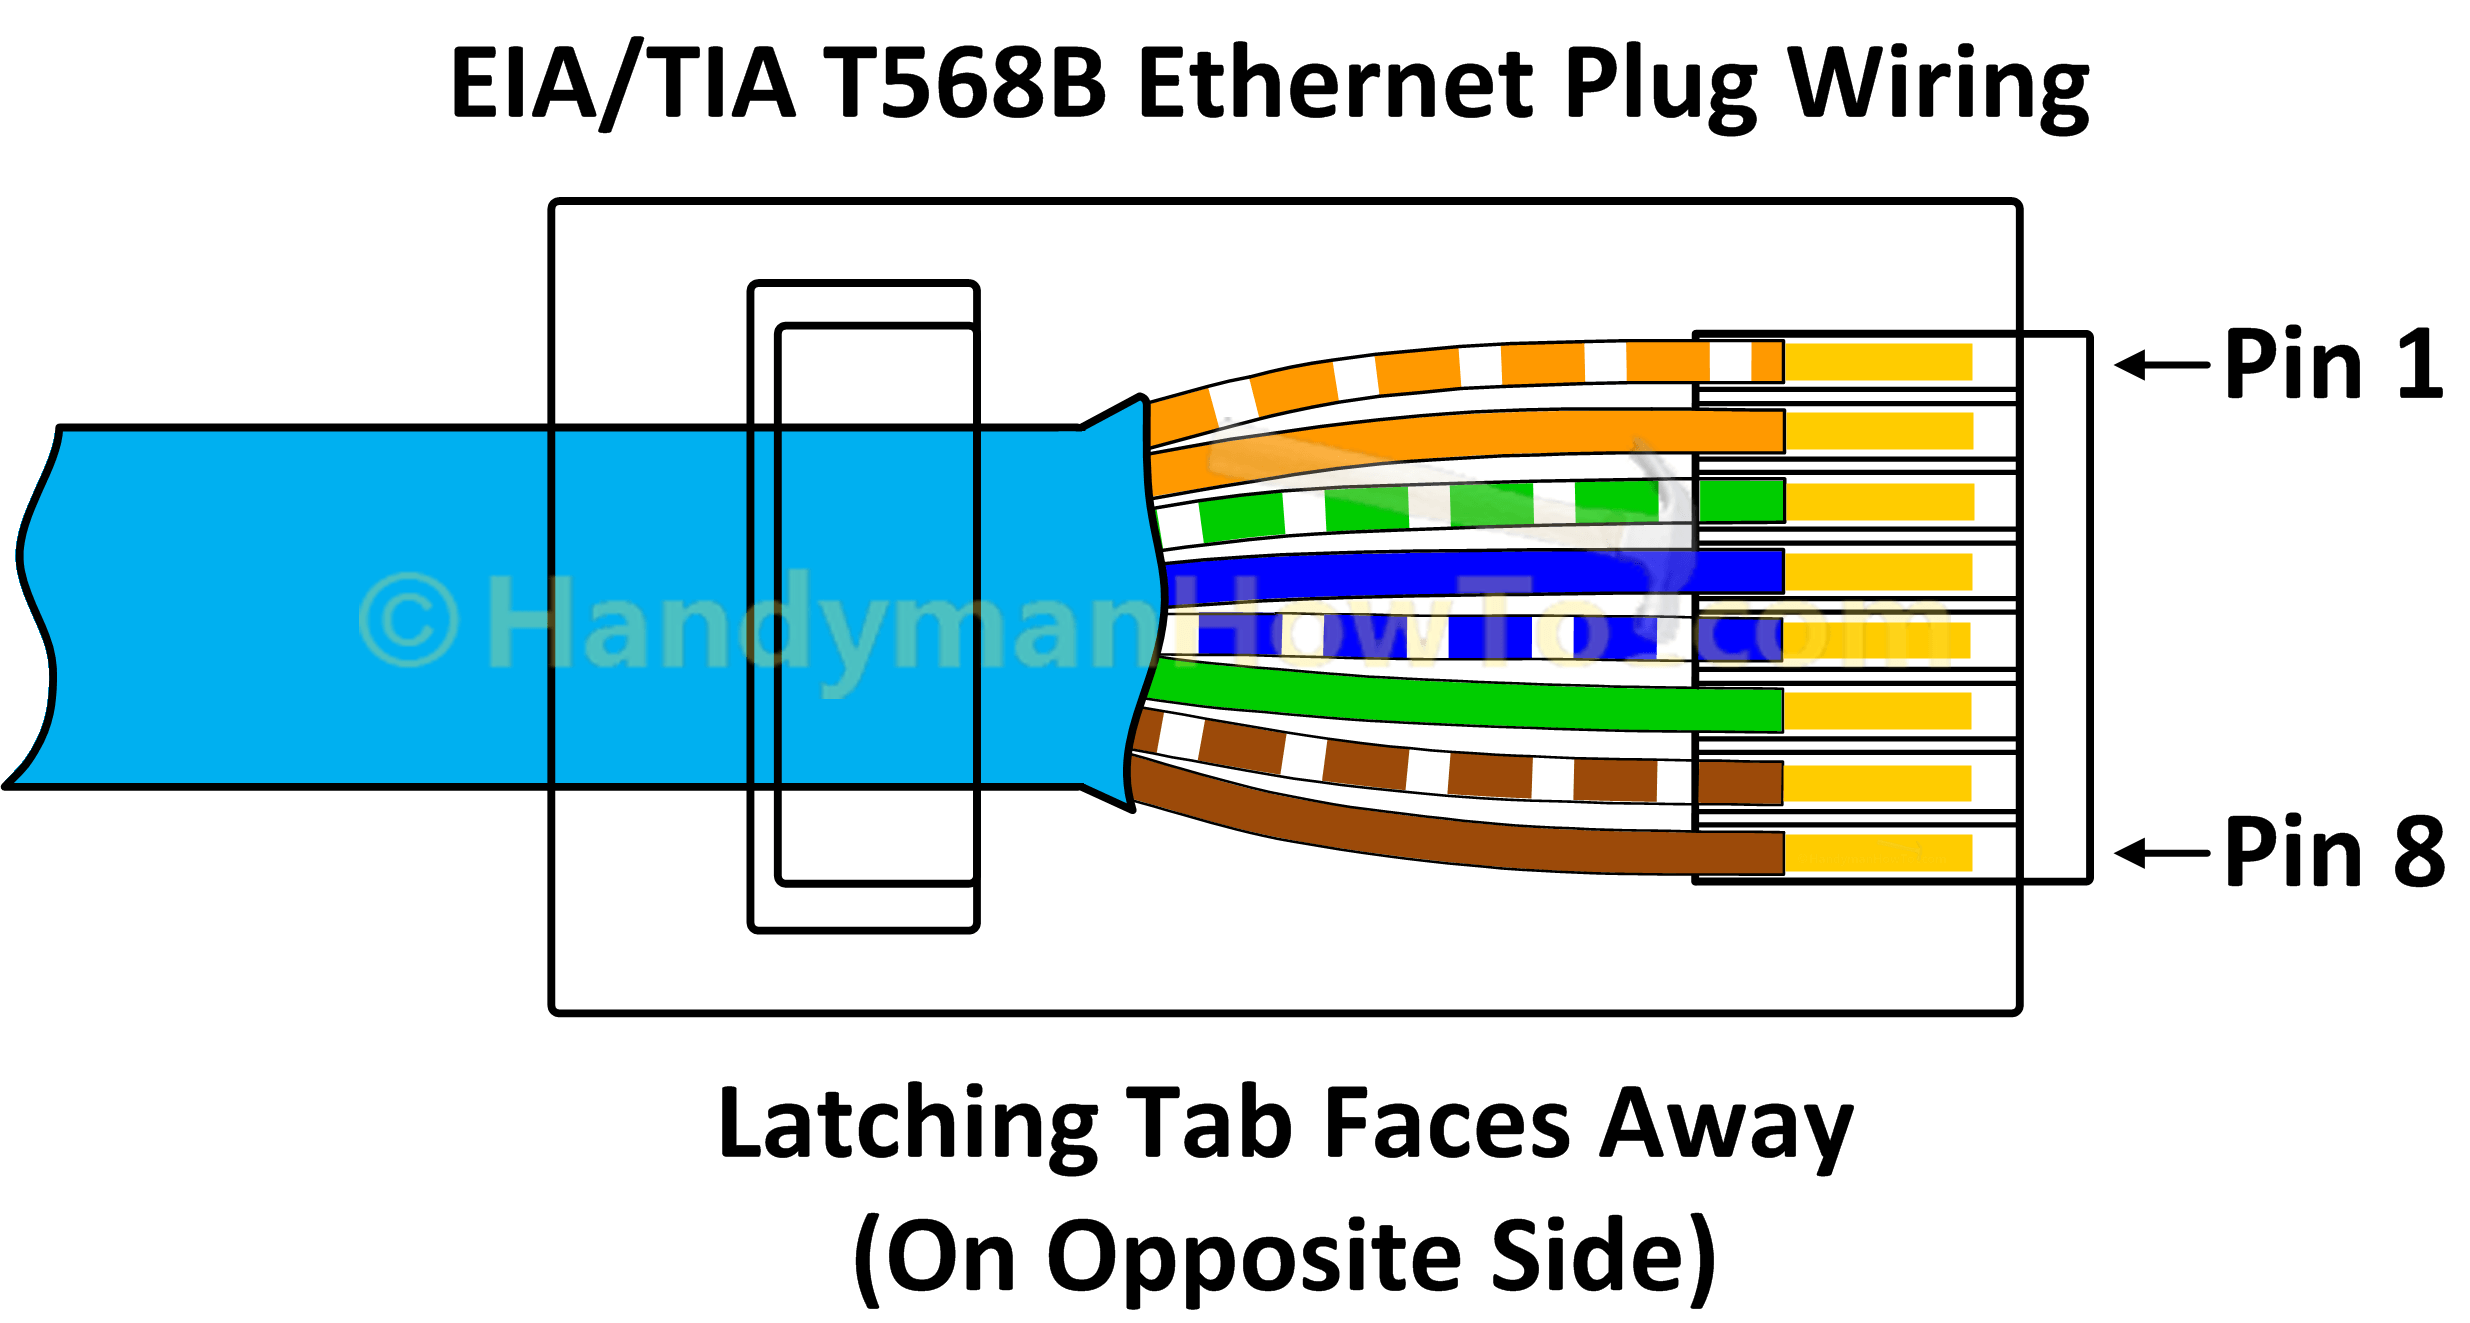 Ether Cable Wiring Diagram together with Fiber Optic Cable Color Code 